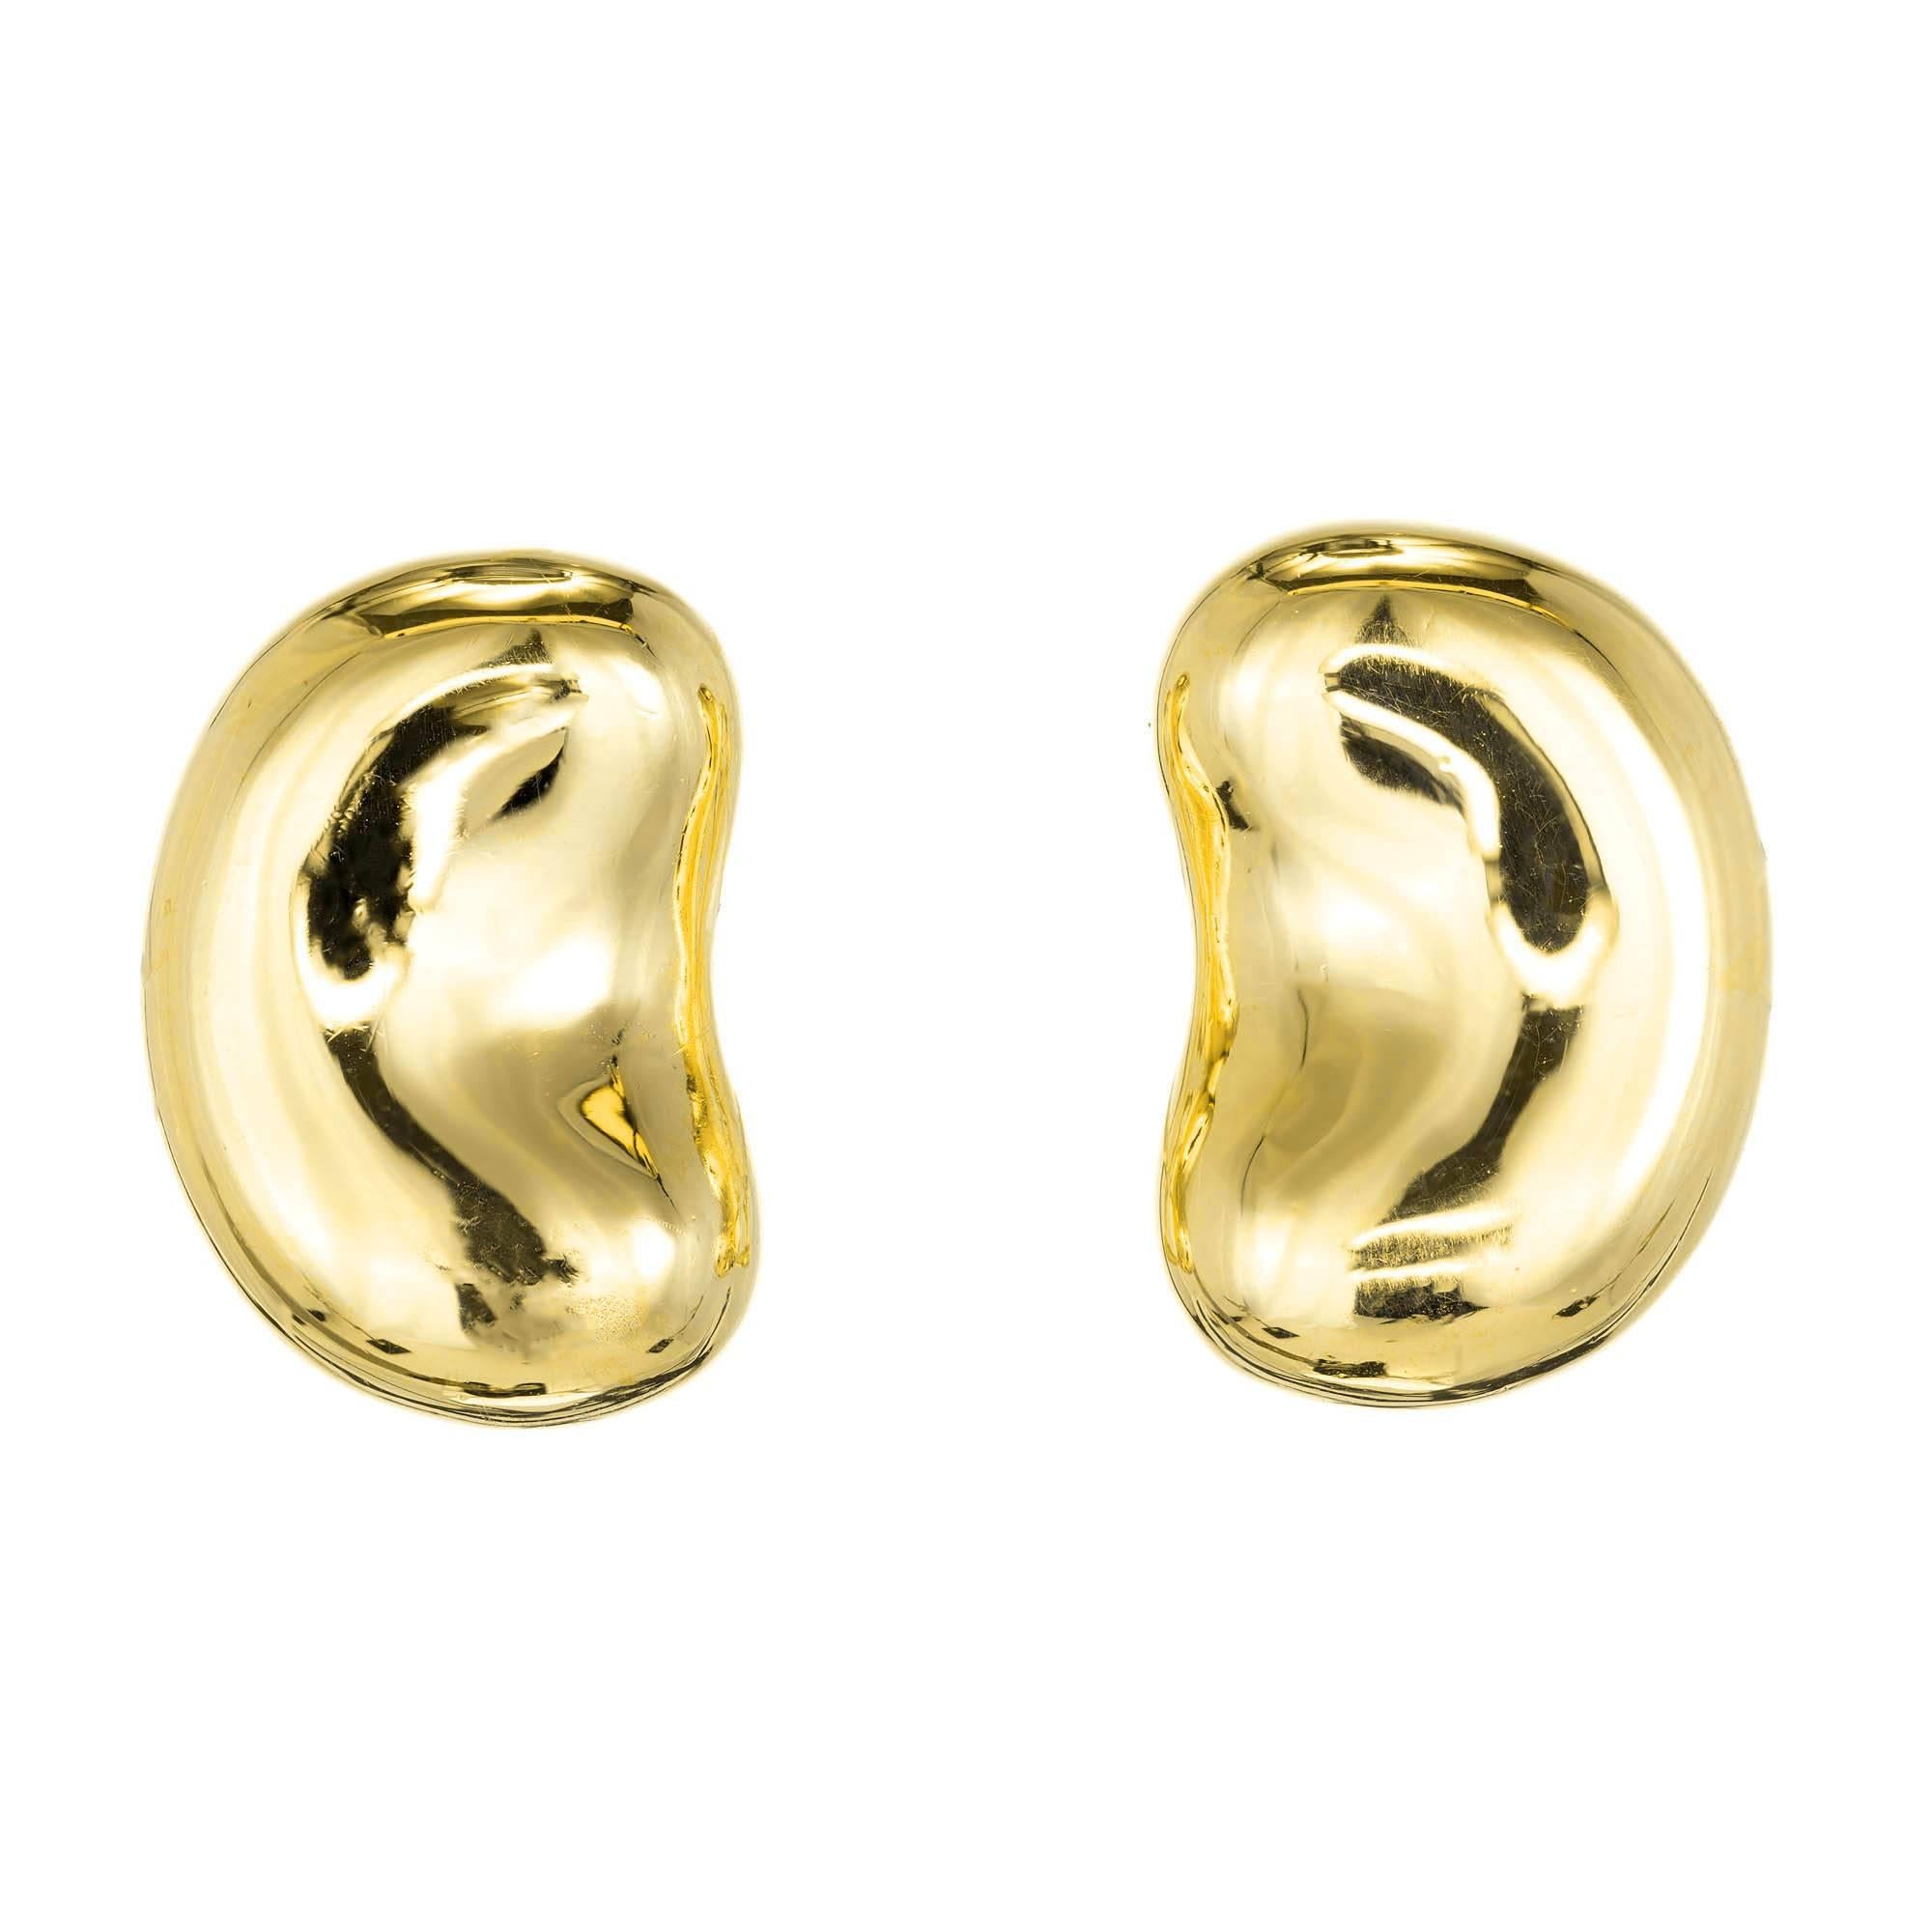 Tiffany & Co Elsa Peretti 18k yellow gold large size clip post earrings. 

18k yellow gold
Top to bottom: 21.51mm or .85 inch
Width: 15mm or .59 inch
Depth: 6.94mm
18.8 grams
Tested: 18k
Stamped: 750
Hallmark: Tiffany & Co Peretti